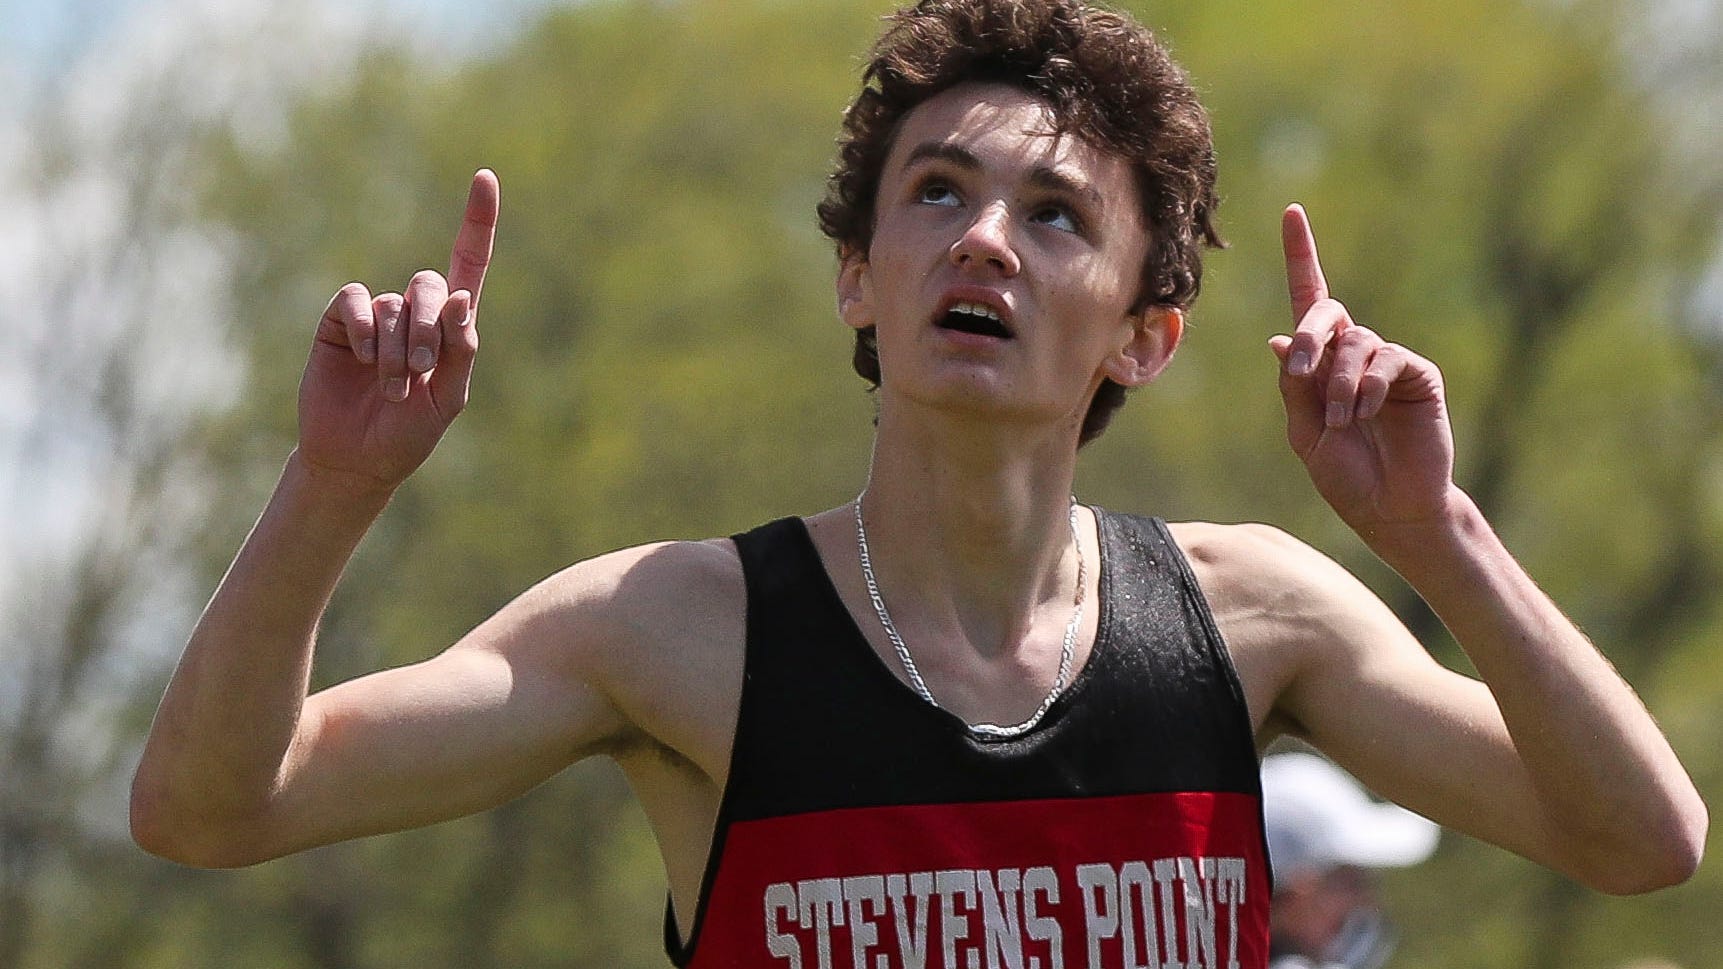 These are the 52 best Wisconsin high school boys cross country runners